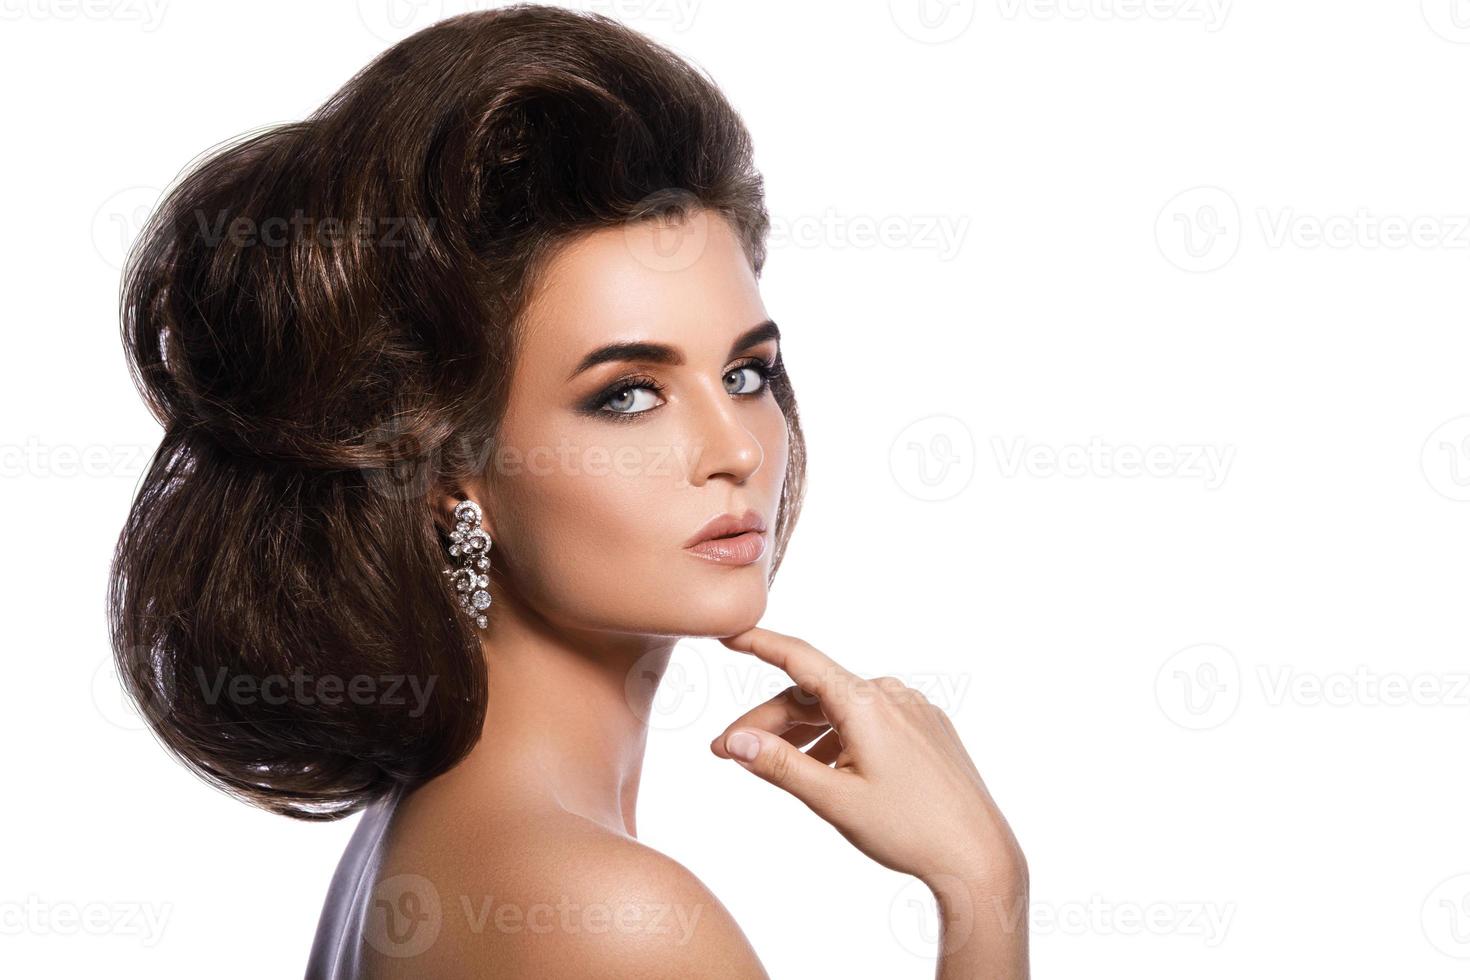 Gorgeous woman with a beautiful hairstyle and make-up photo